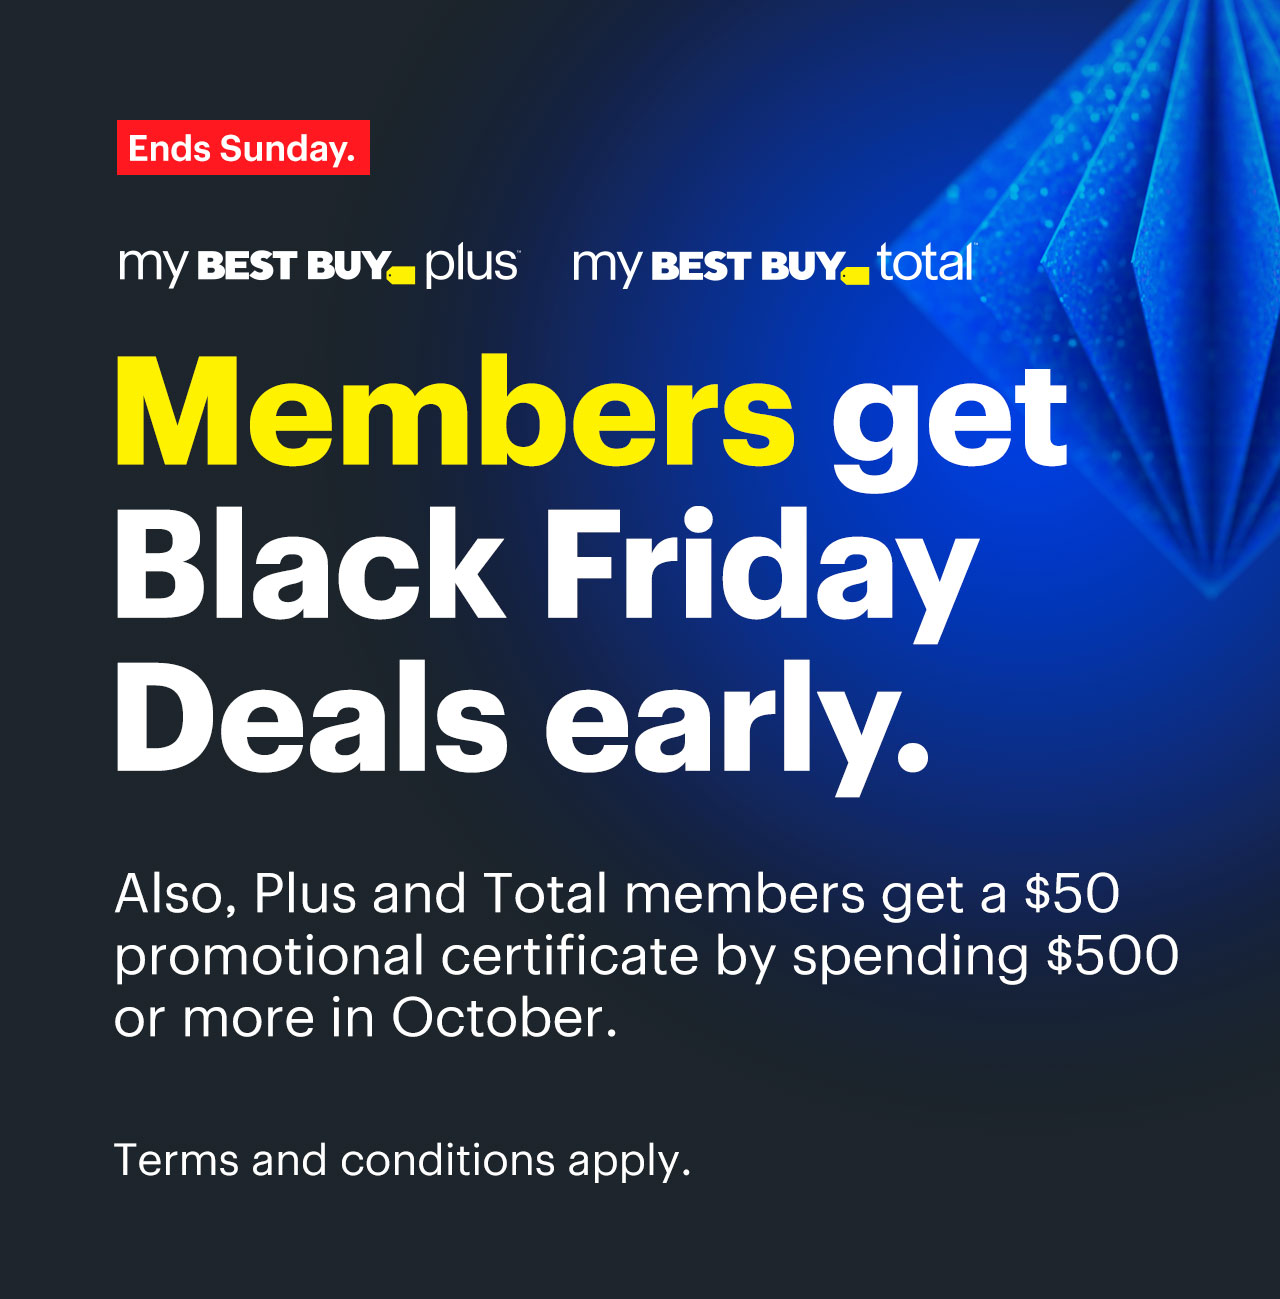 Members get Black Friday Deals early. Ends Sunday. Also, Plus and Total members get a $50 promotional certificate by spending $500 or more in October. Terms and conditions apply. Reference disclaimer.